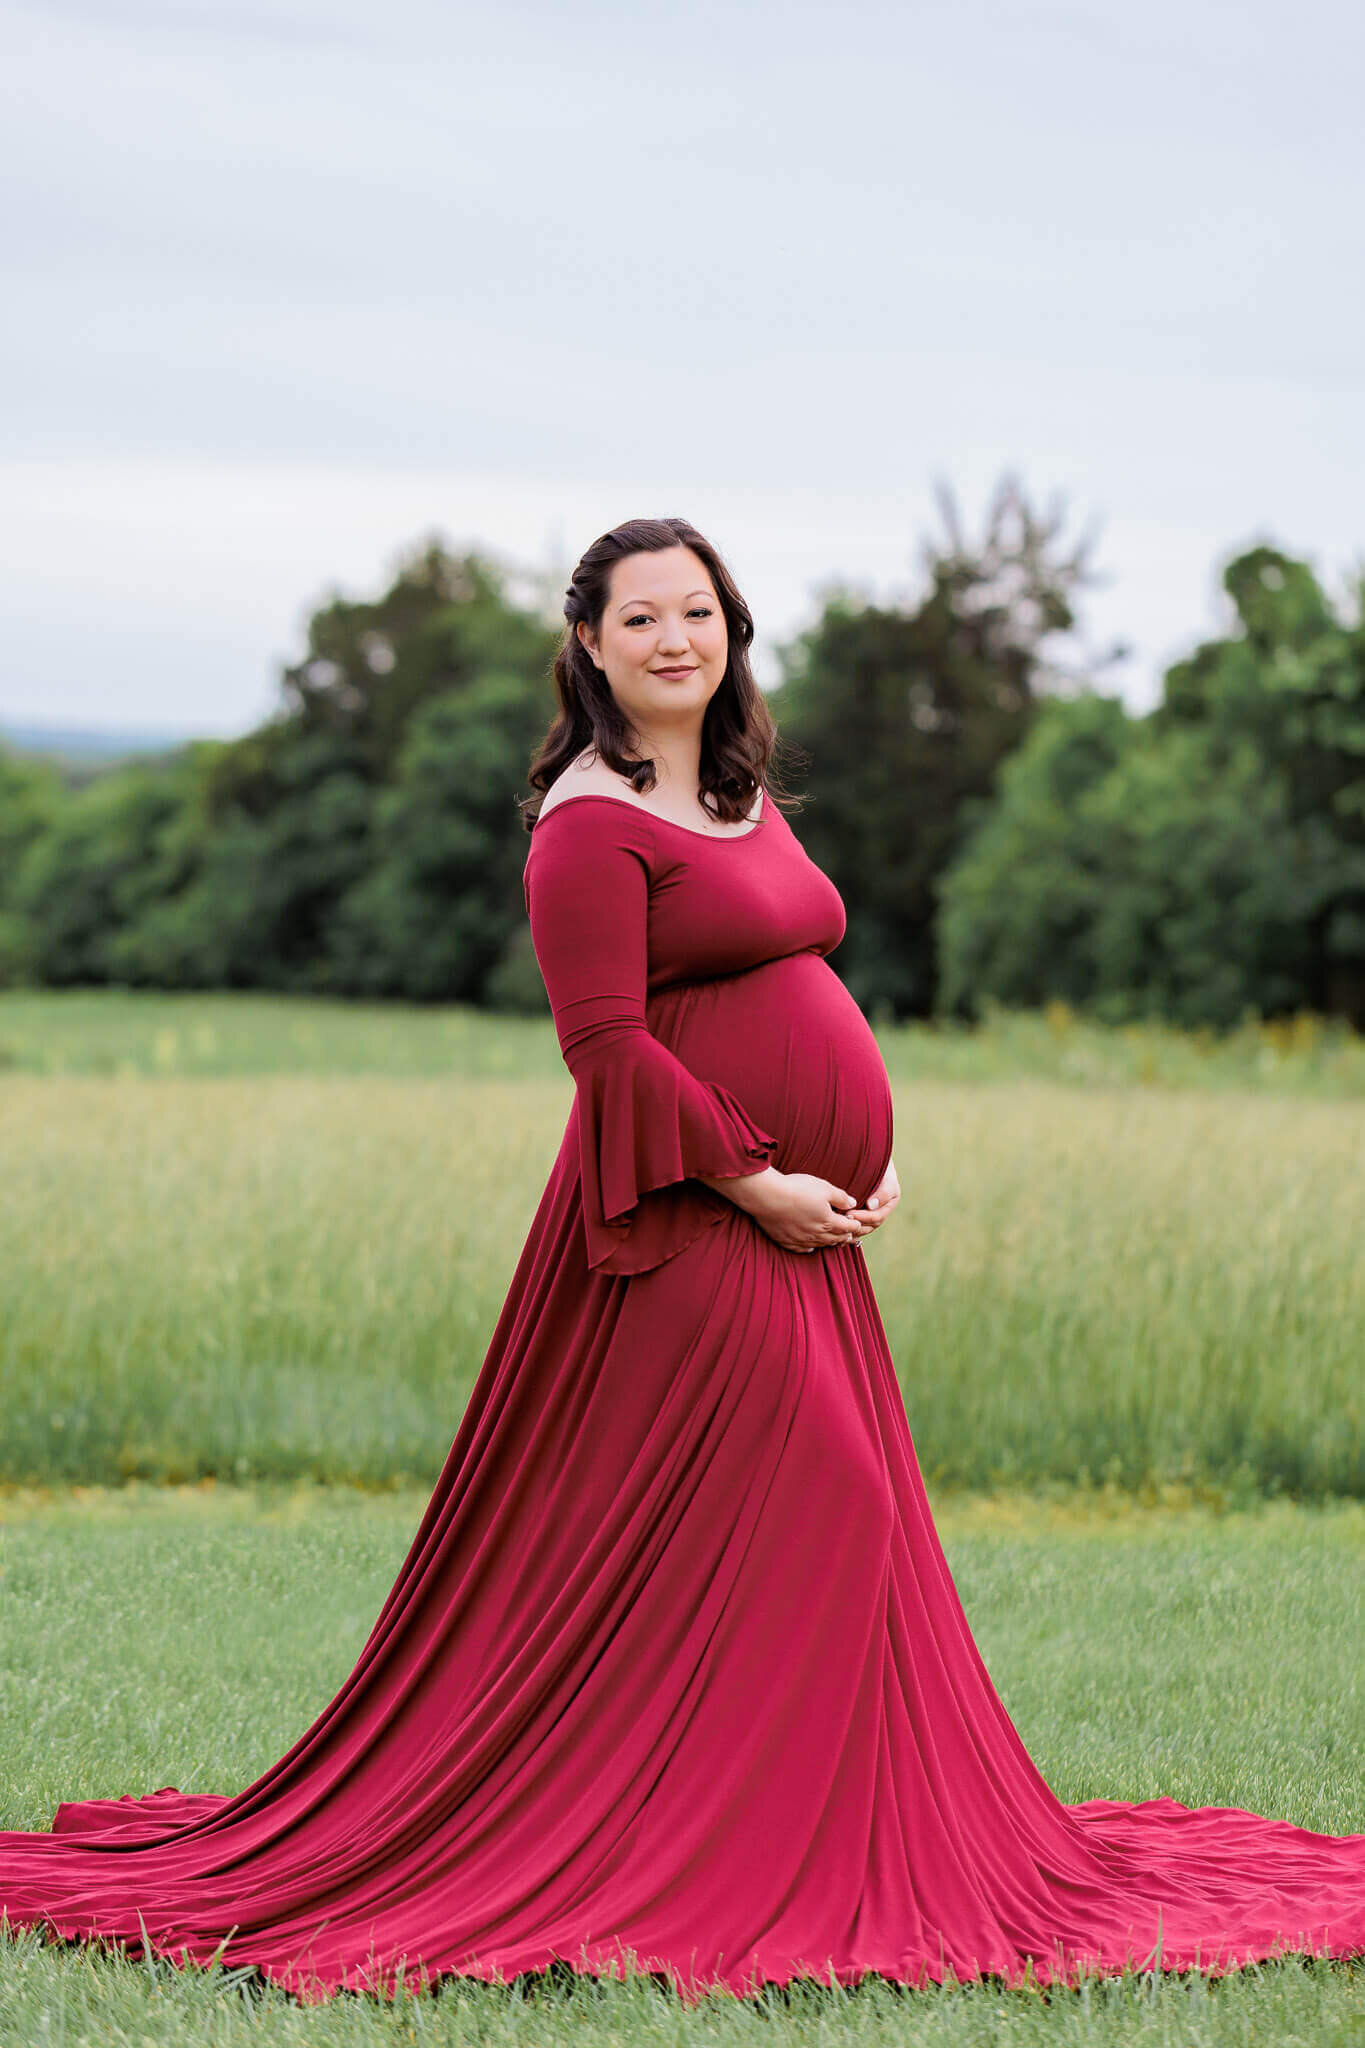 A beautiful mother-to-be posing in a field in Manassas in a red dress.